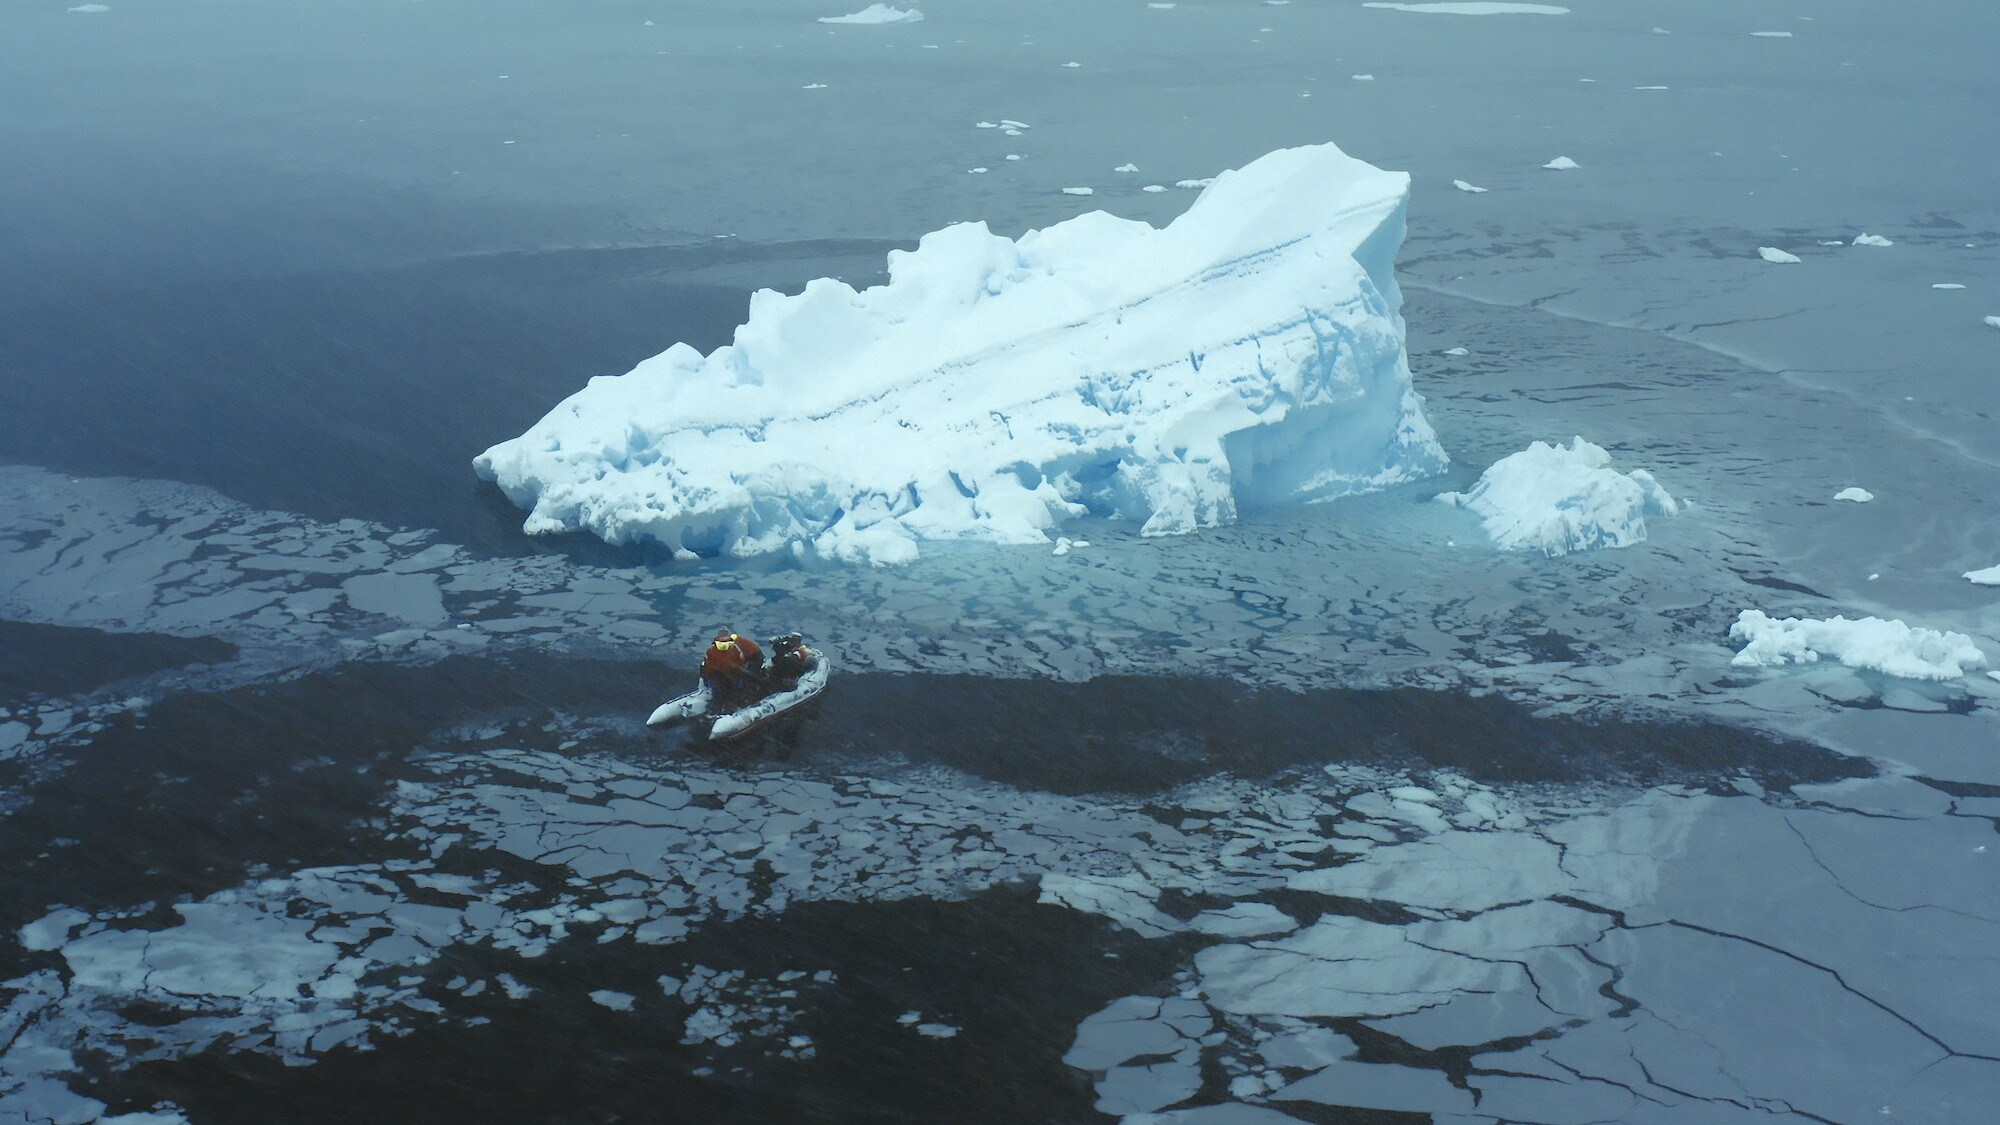 The filming crew onboard the rib moving towards an iceberg. (credit: National Geographic for Disney+/Tom Walker)